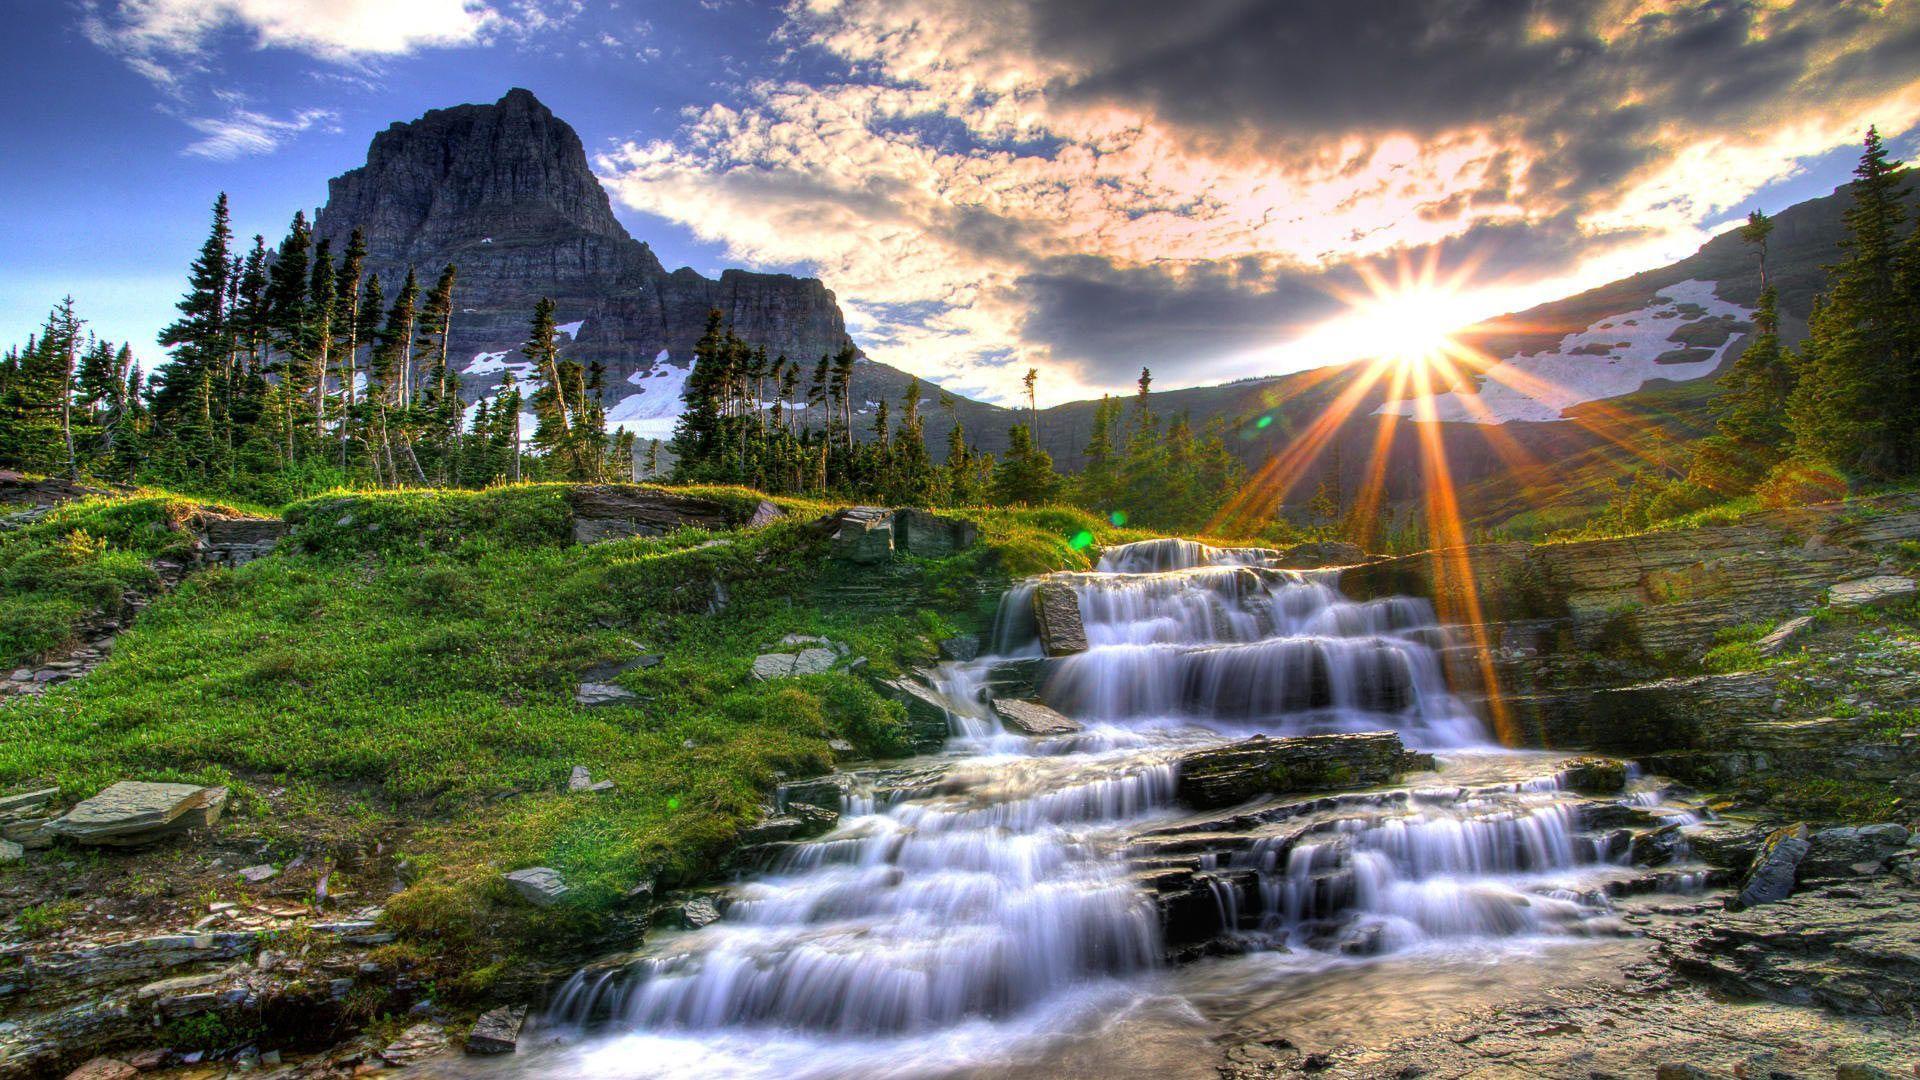 1920x1080 desktop wallpaper of a waterfall in the mountains with the sun rising - Nature